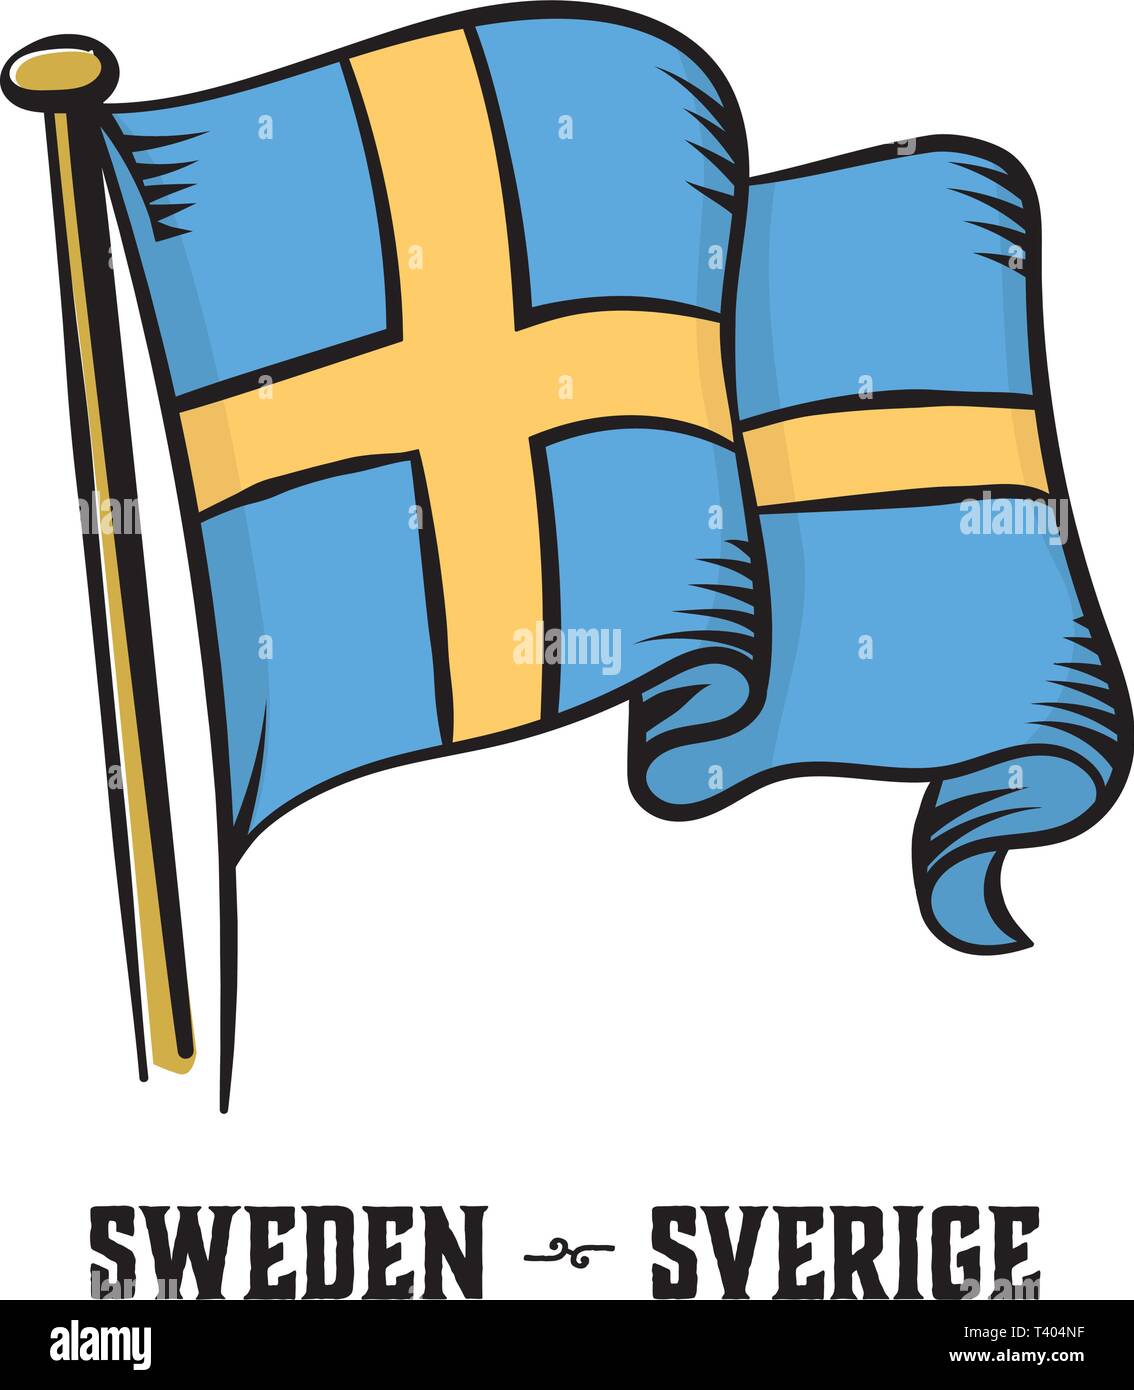 Vintage engraved style isolated Sweden flag vector illustration Stock Vector